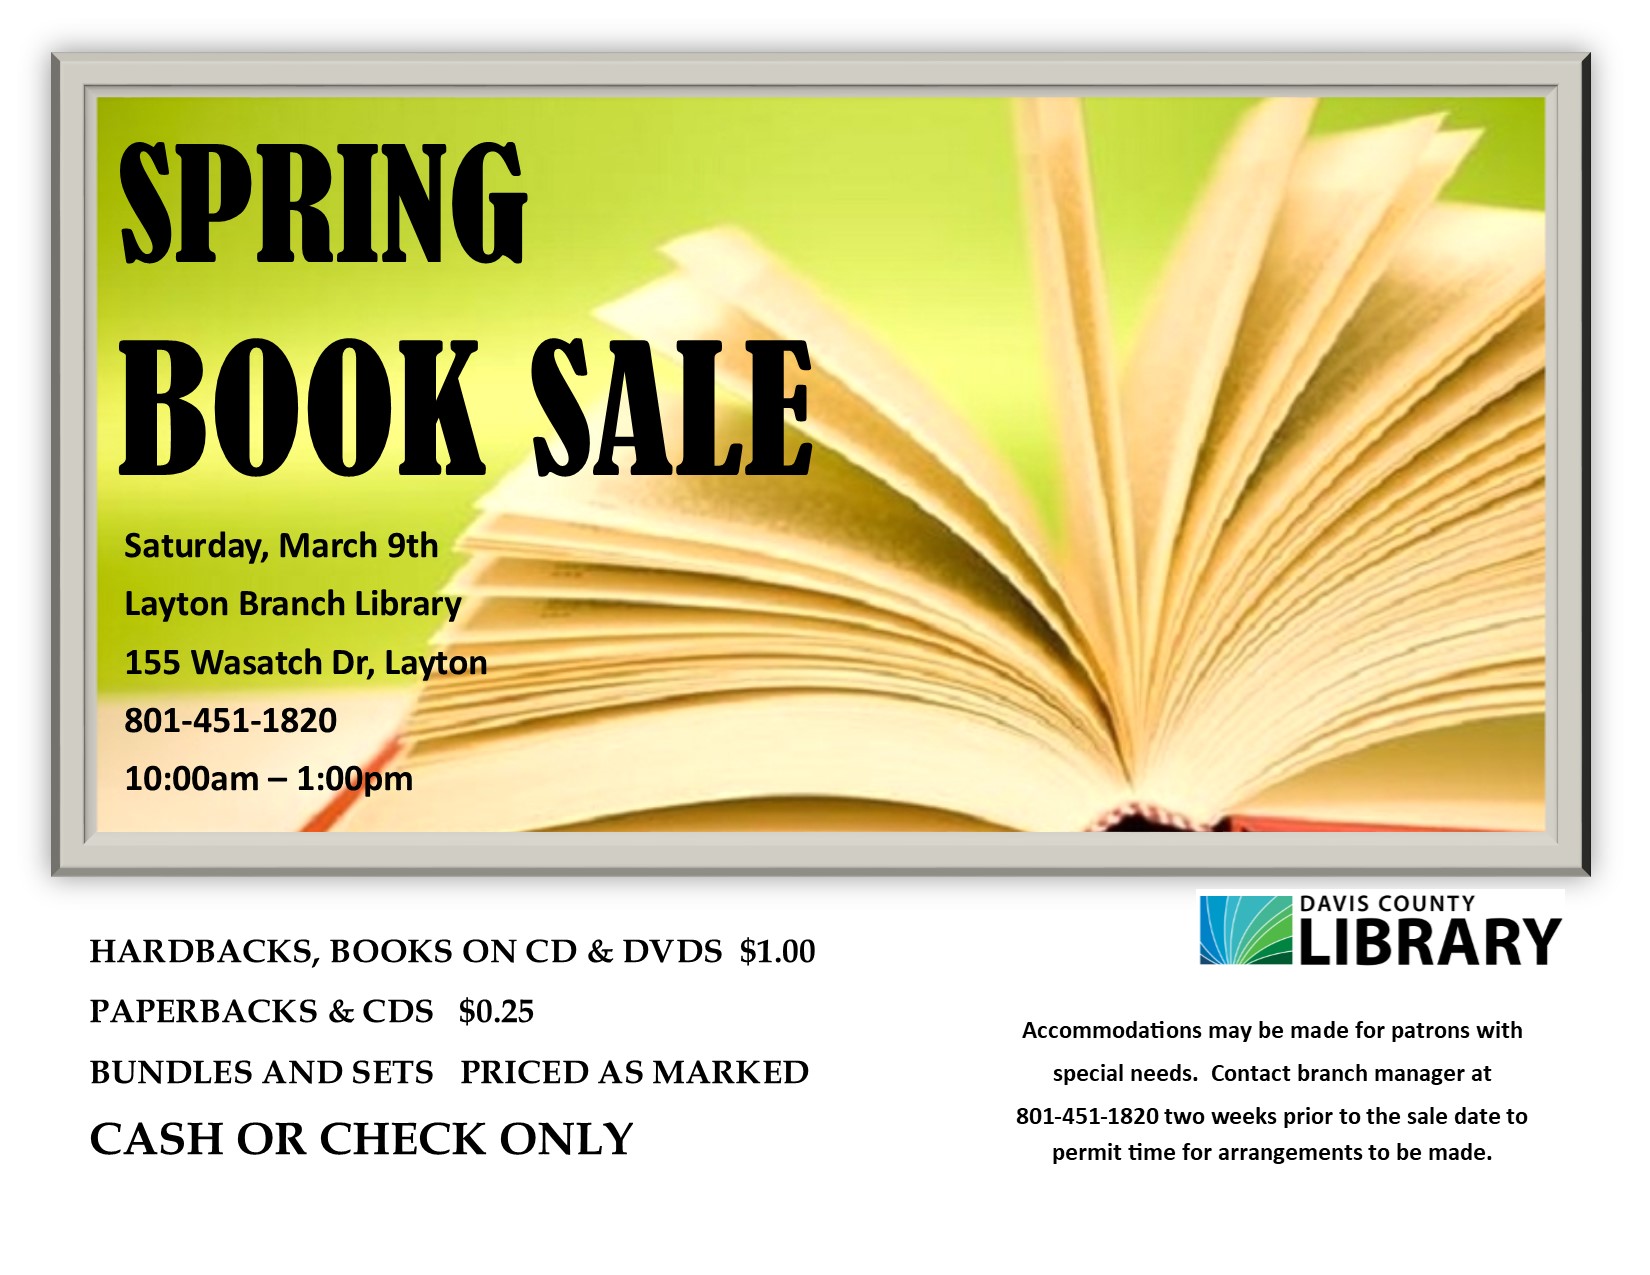 Spring Book Sale will be on March 9th, 2023, 10am to 1pm at the Layton Branch